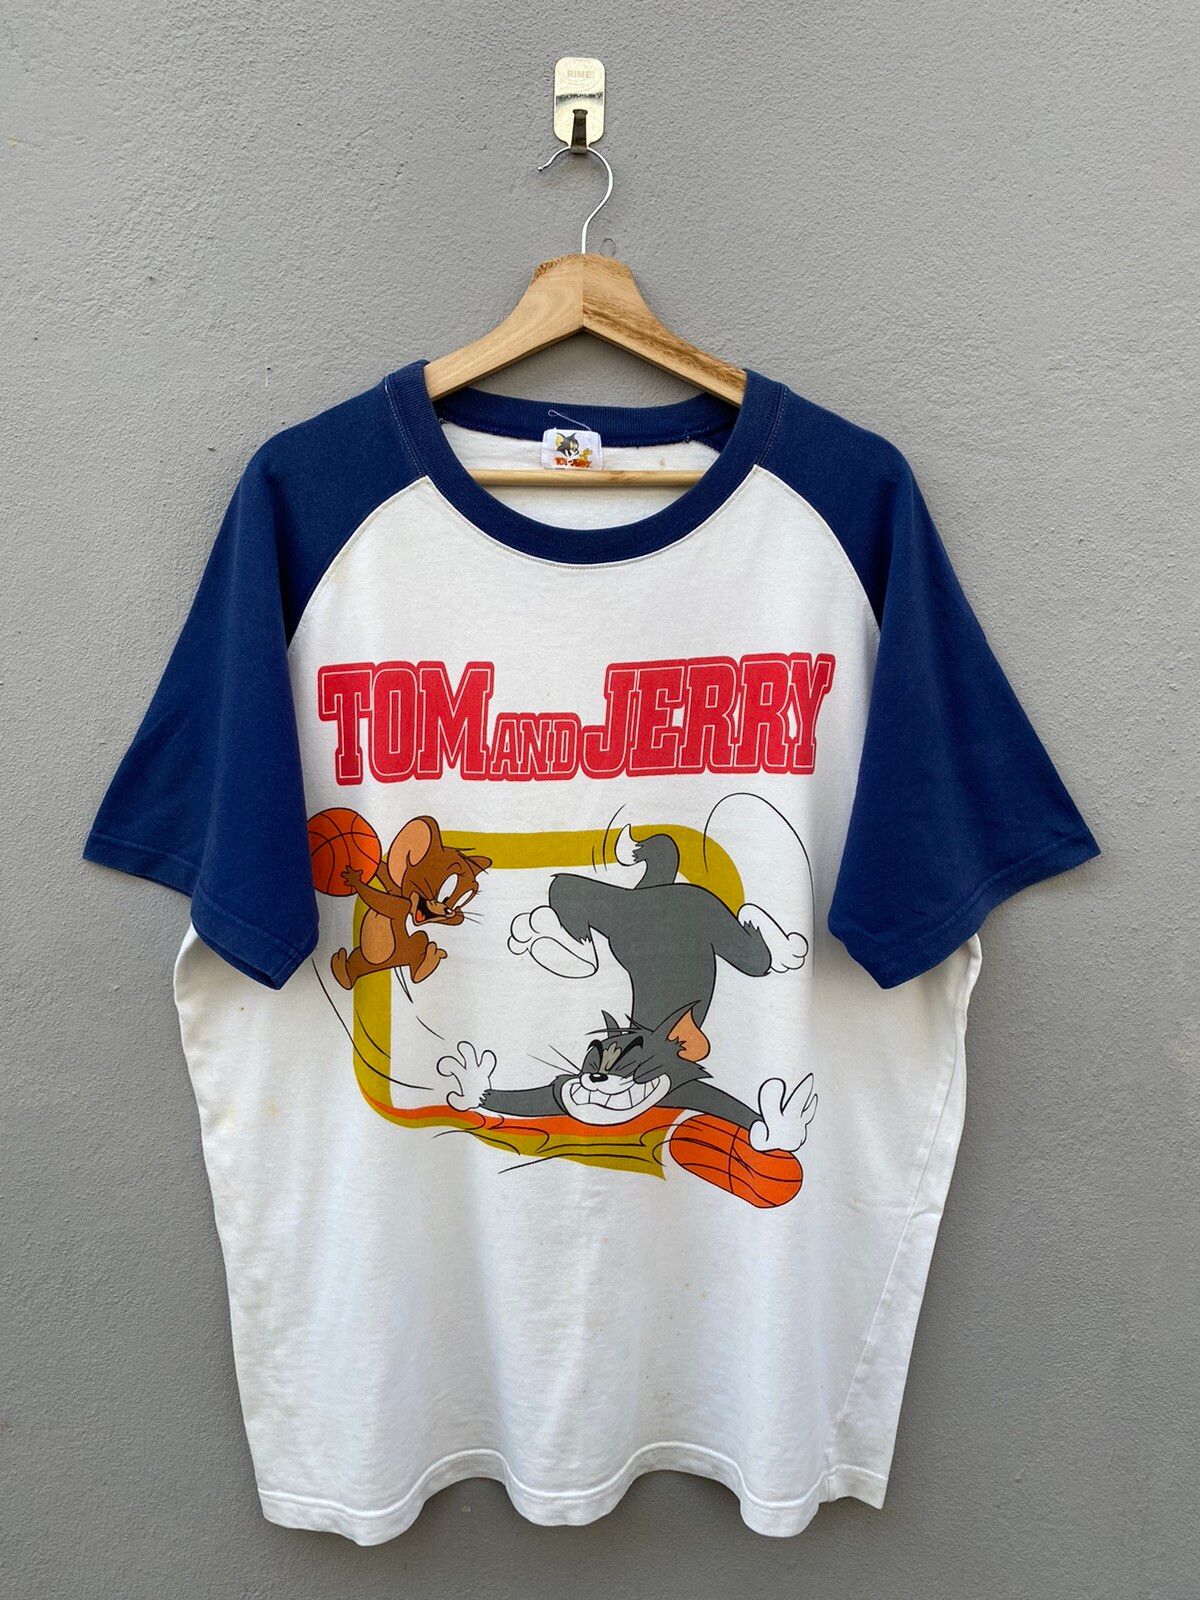 Vintage vintage 90s overprint cartoon network toms and jerry tee | Grailed